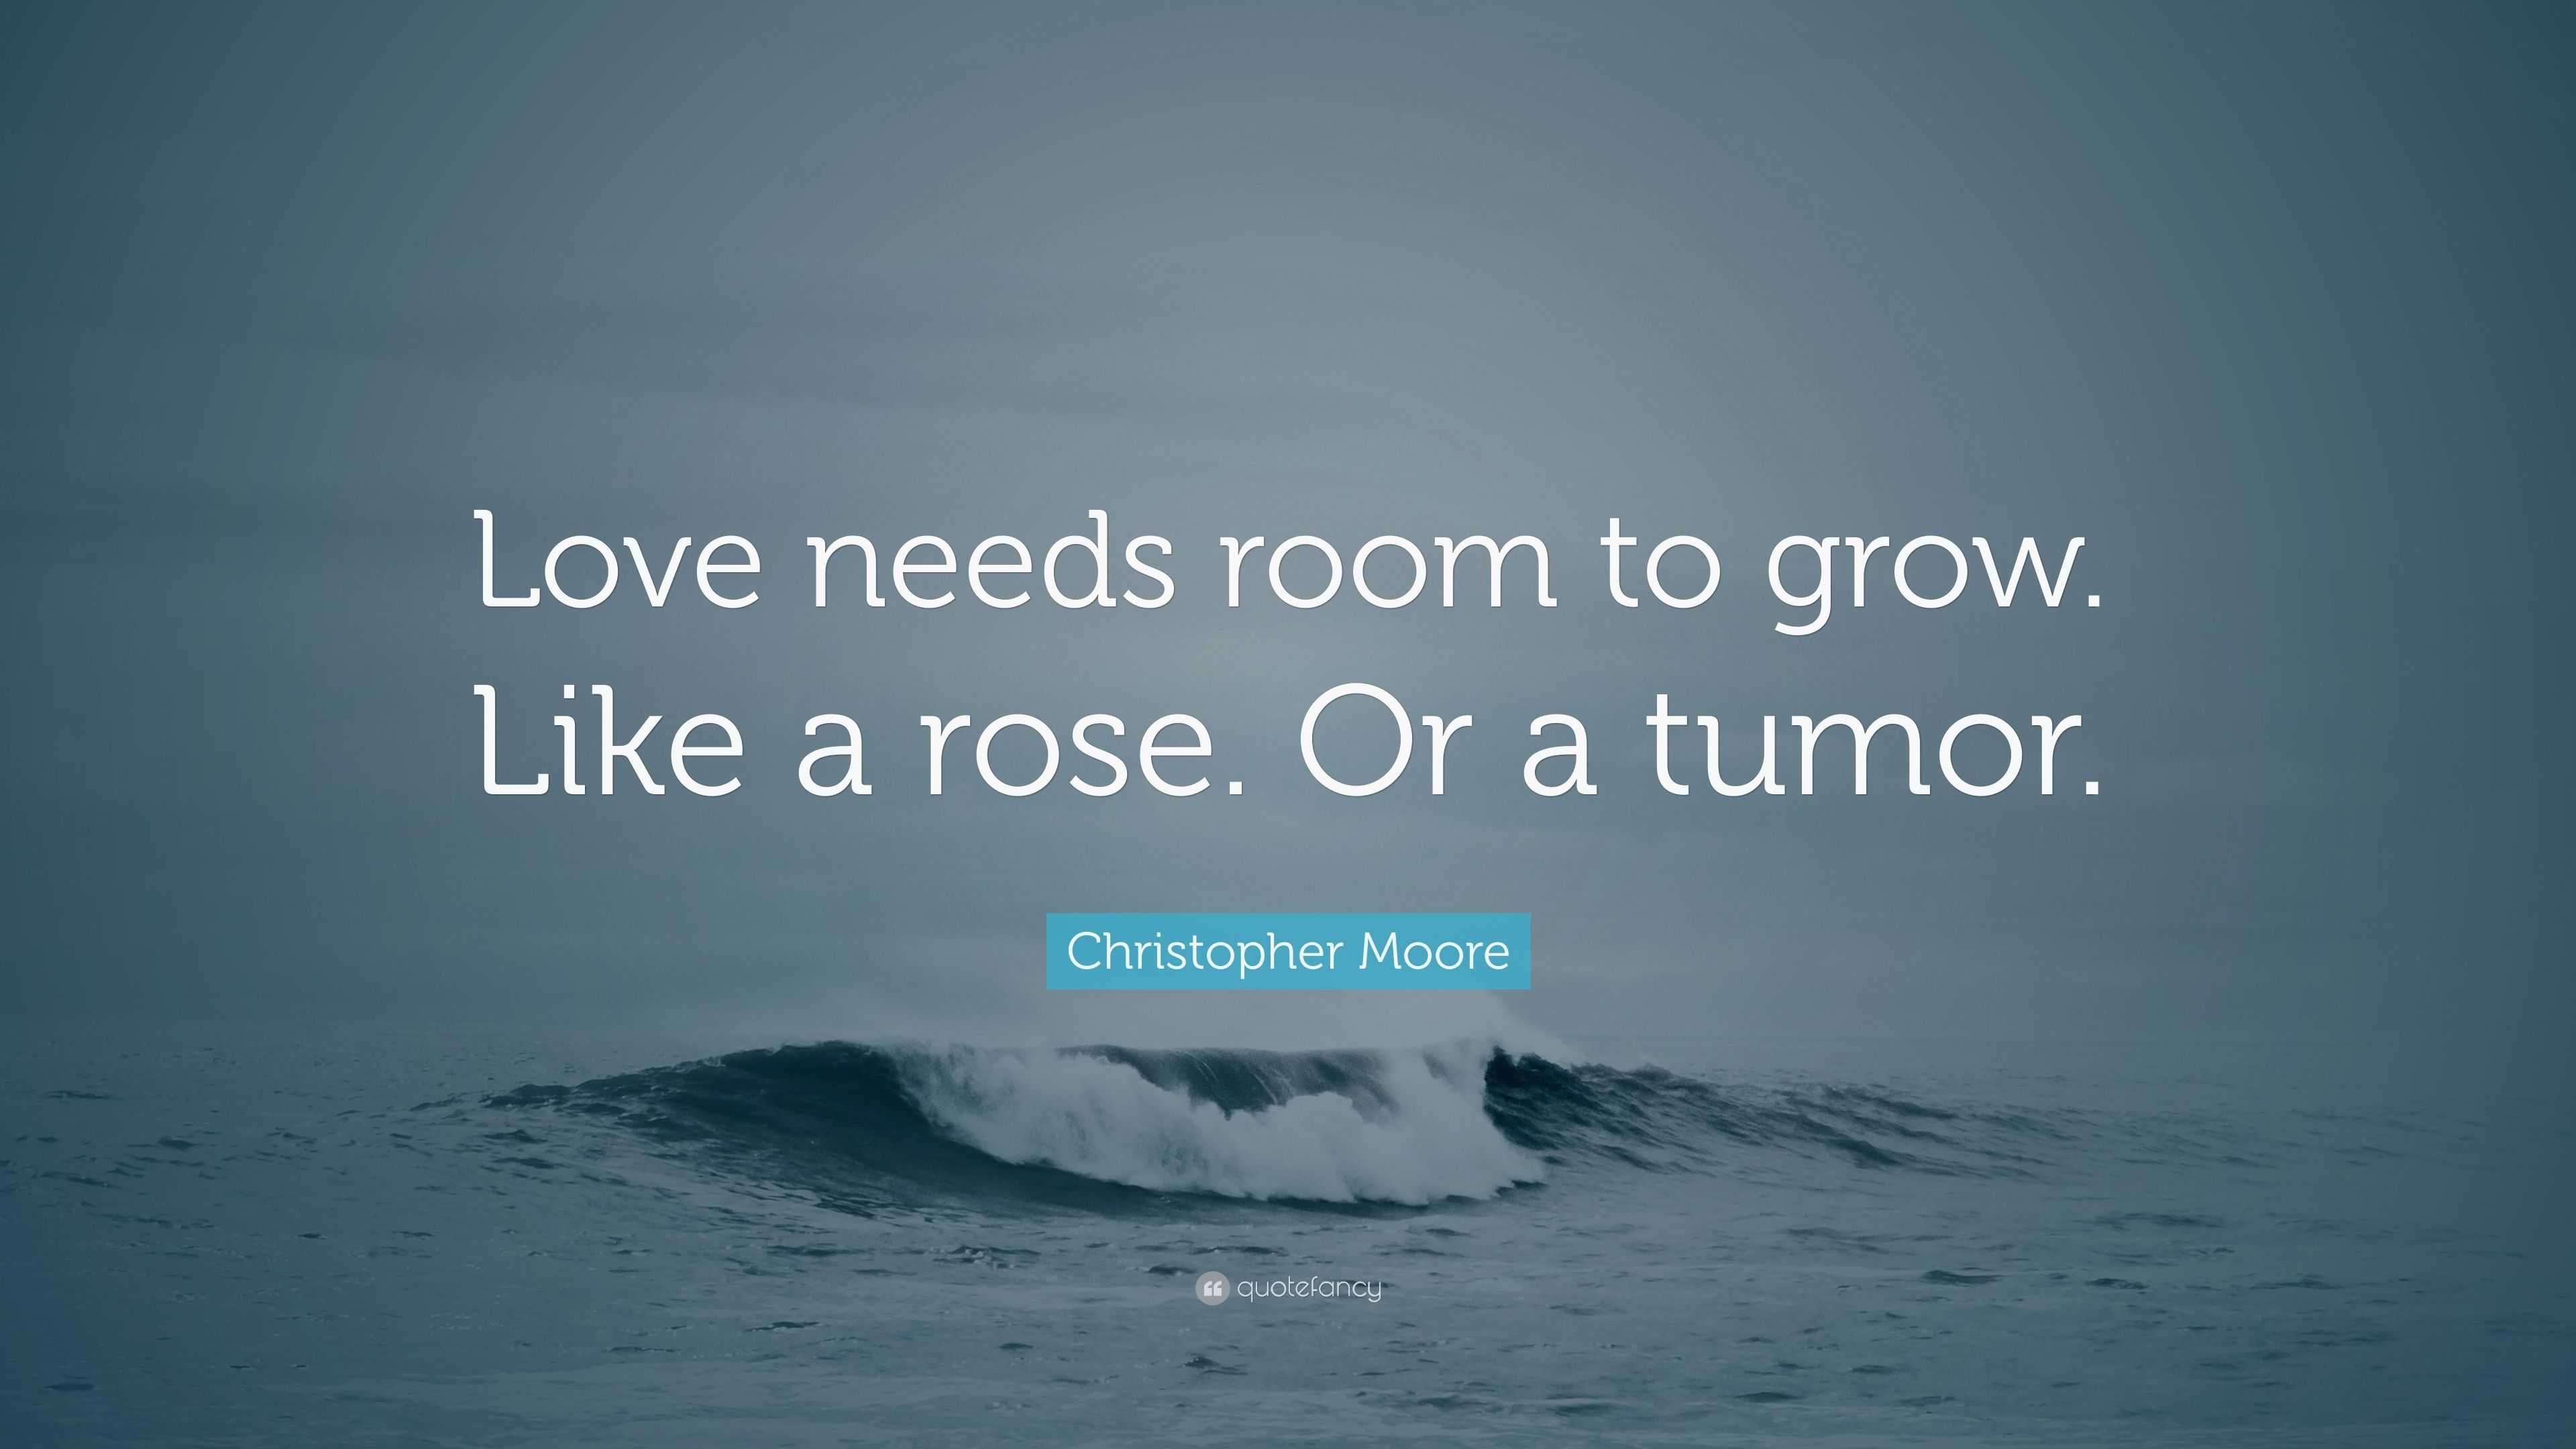 Christopher Moore Quote: “Love needs room to grow. Like a rose. Or